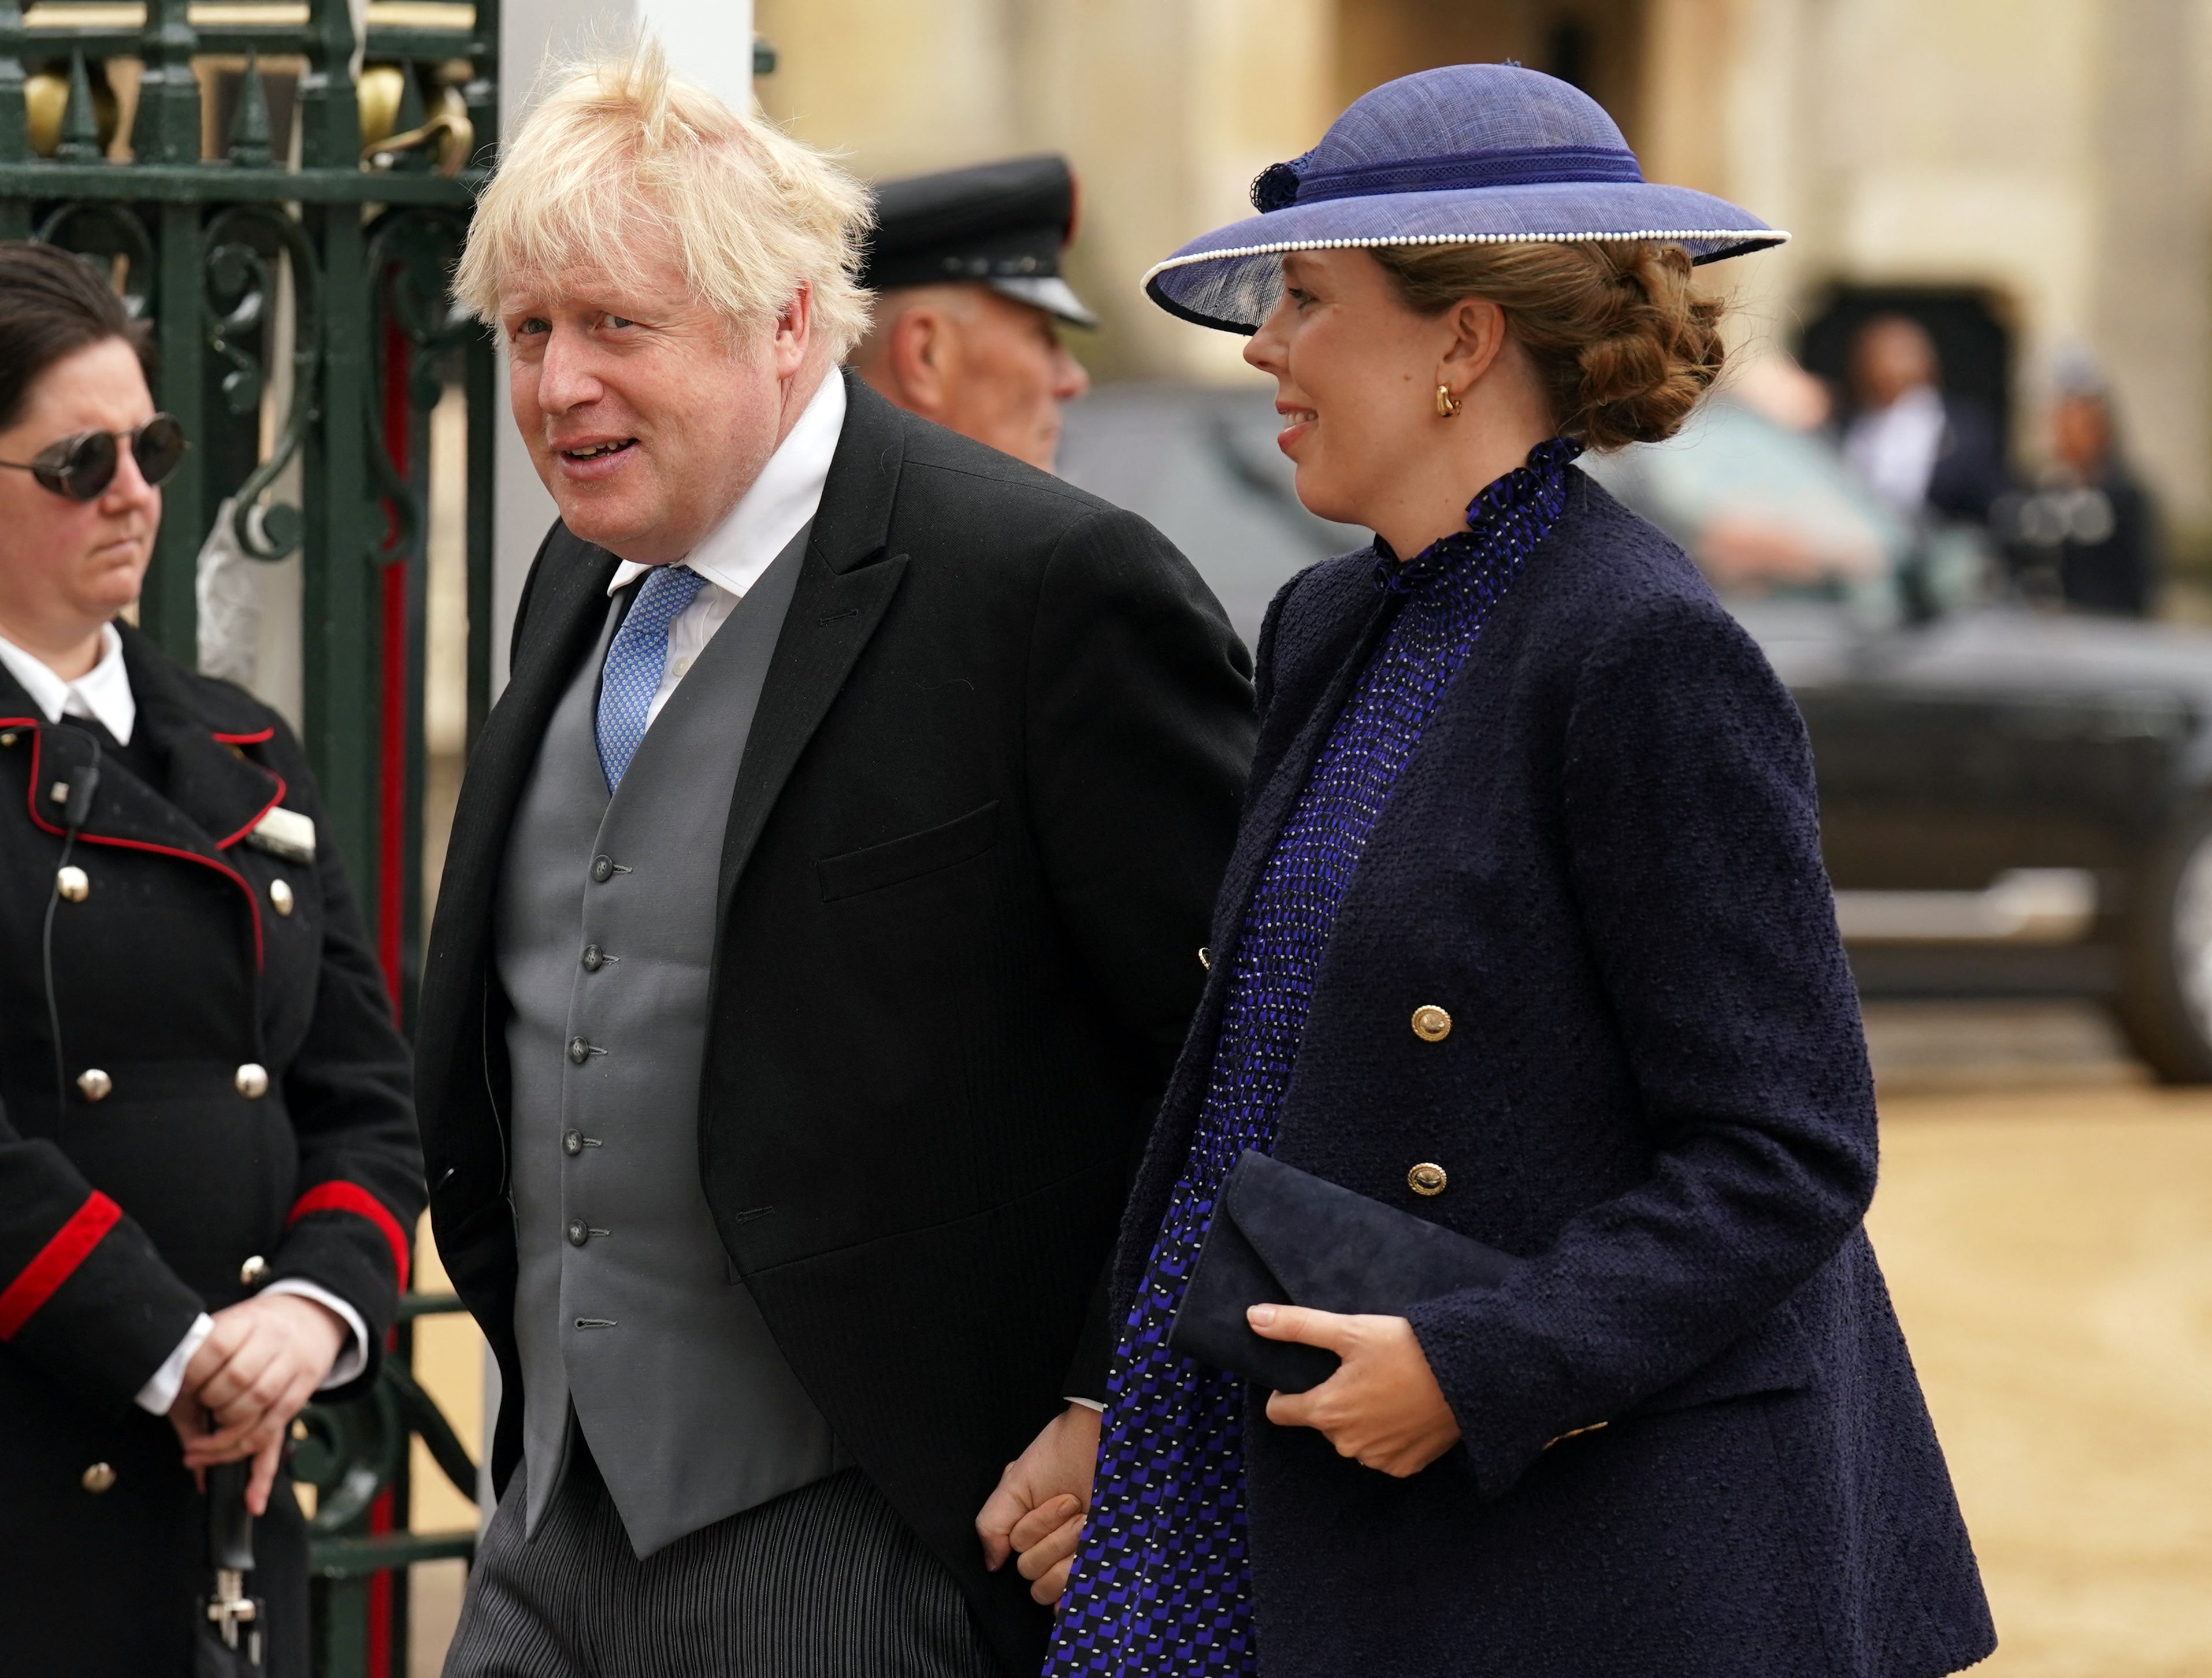 Former British Prime Minister Boris Johnson and his wife coming to the event